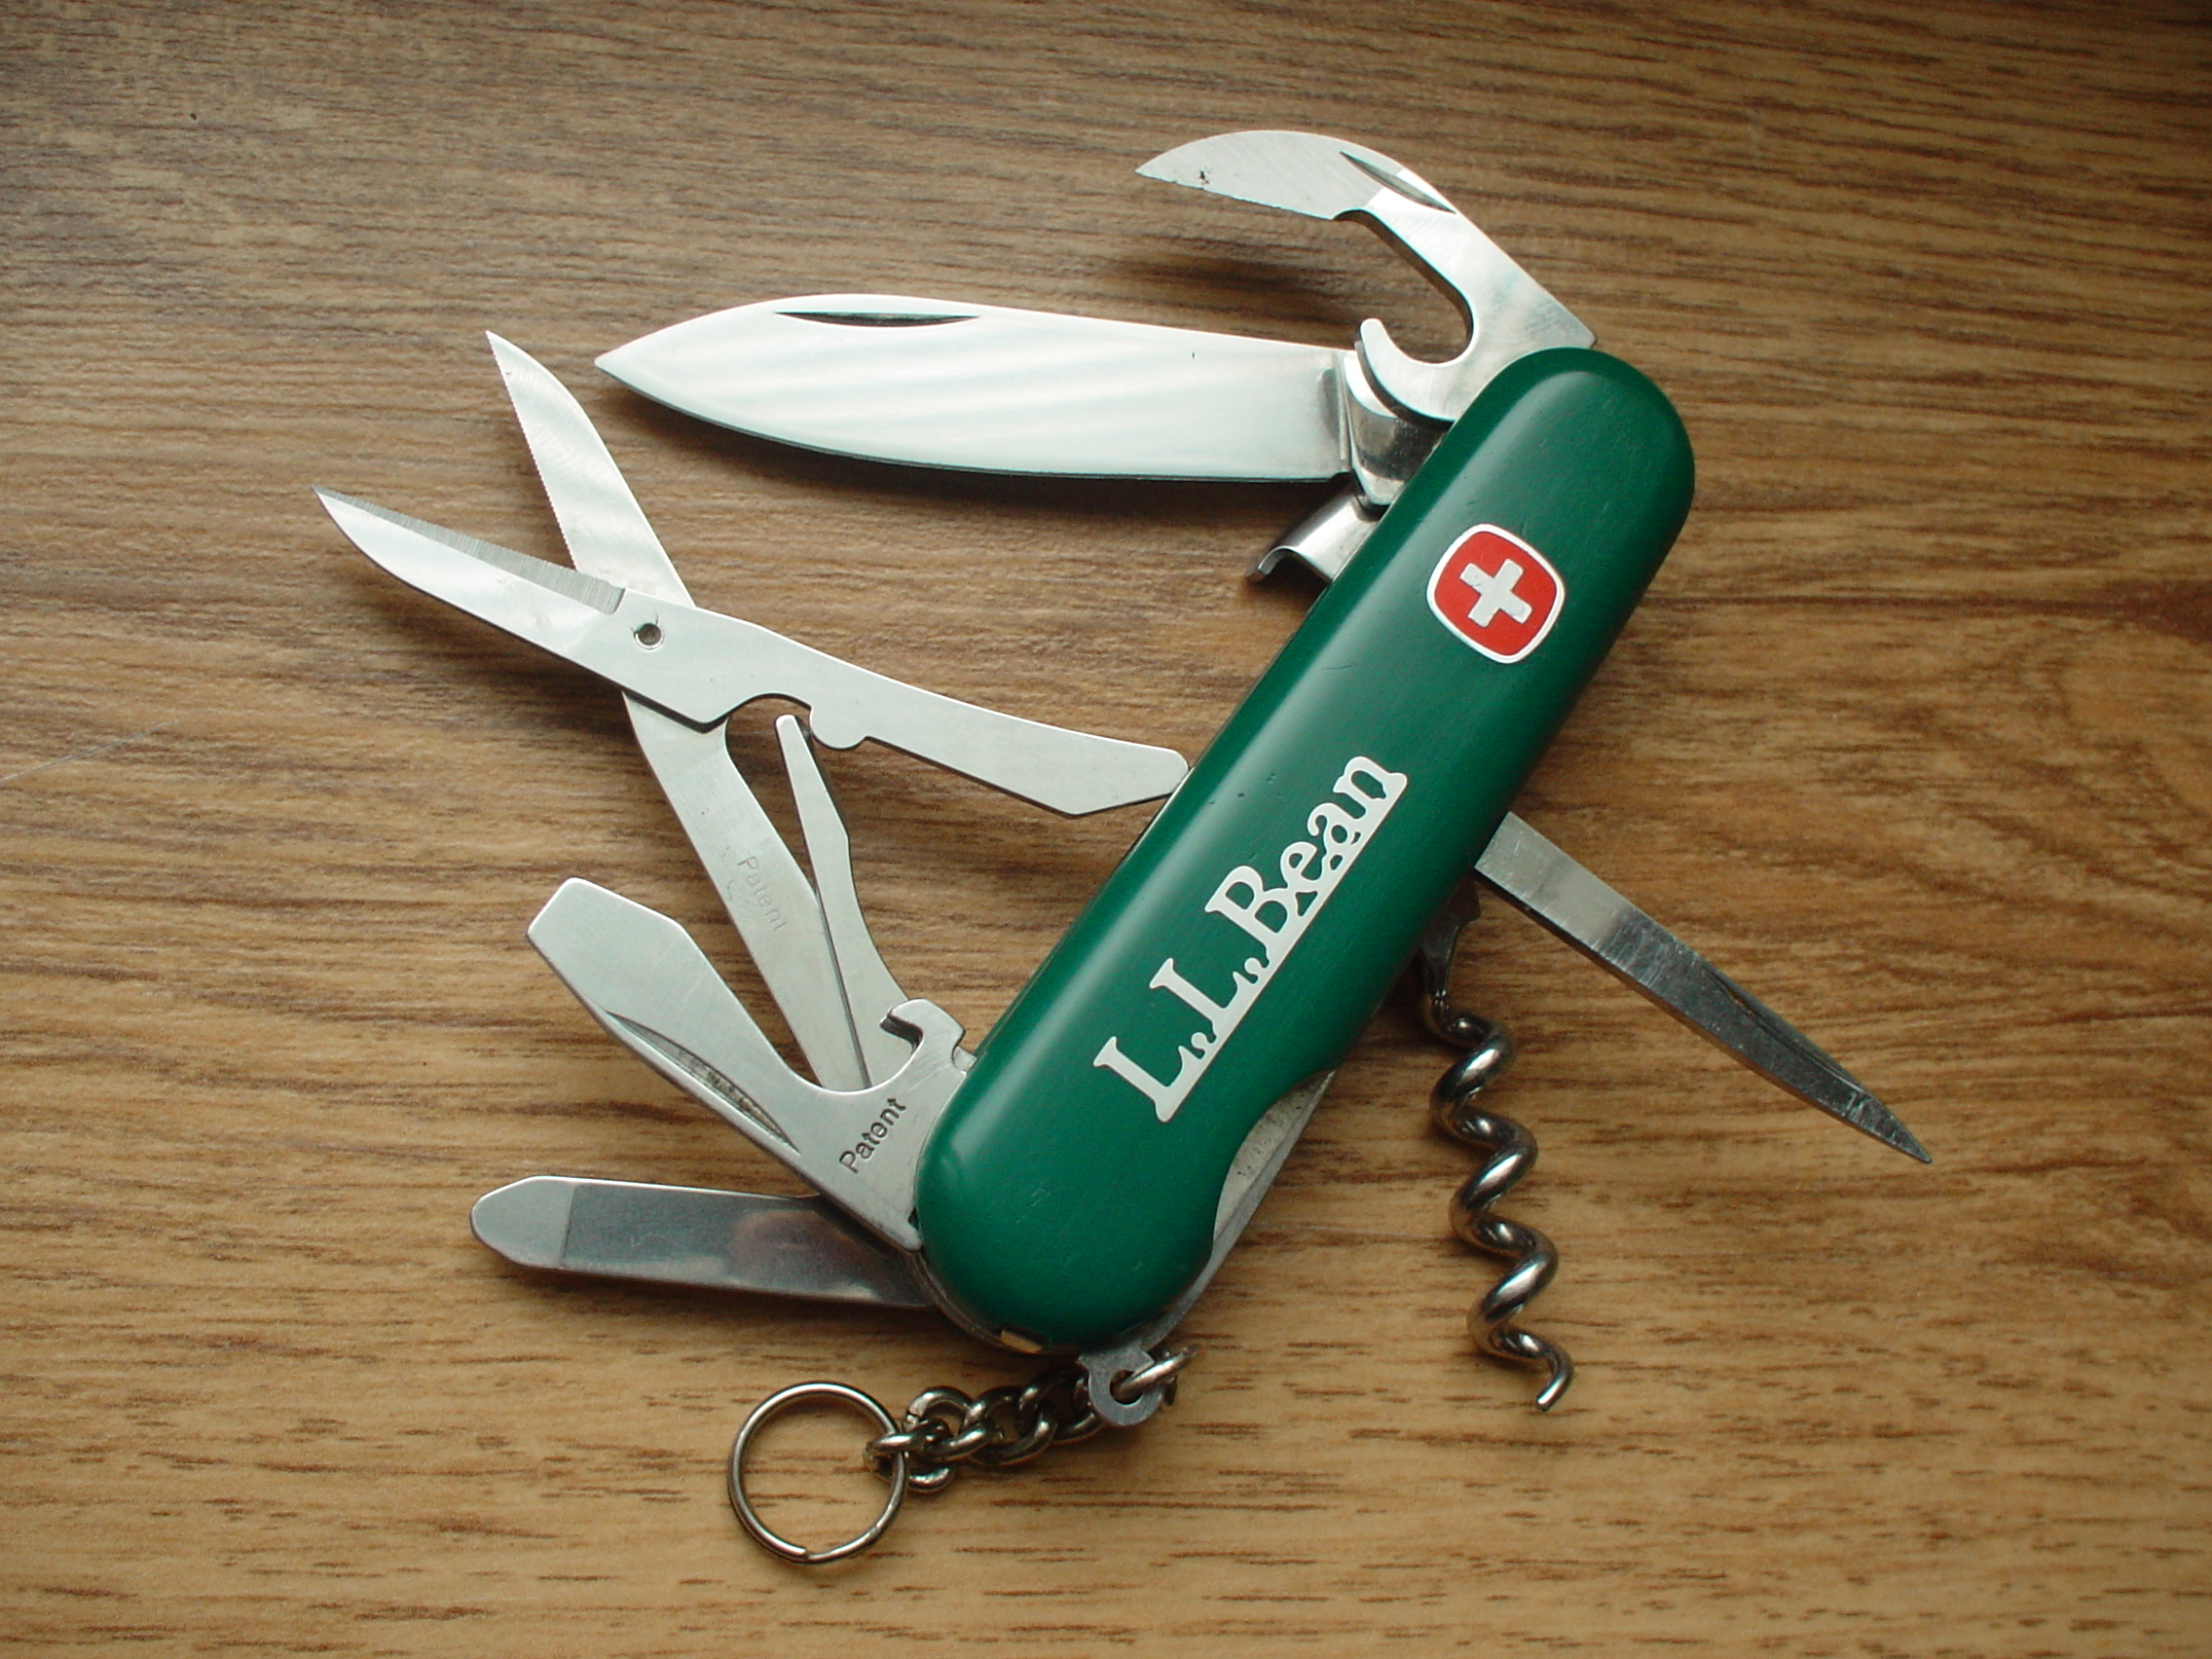 The naming for this Wenger model may be L.L.Bean specific. The special features of this 85mm model are a flat Phillips screwdriver and a locking blade.